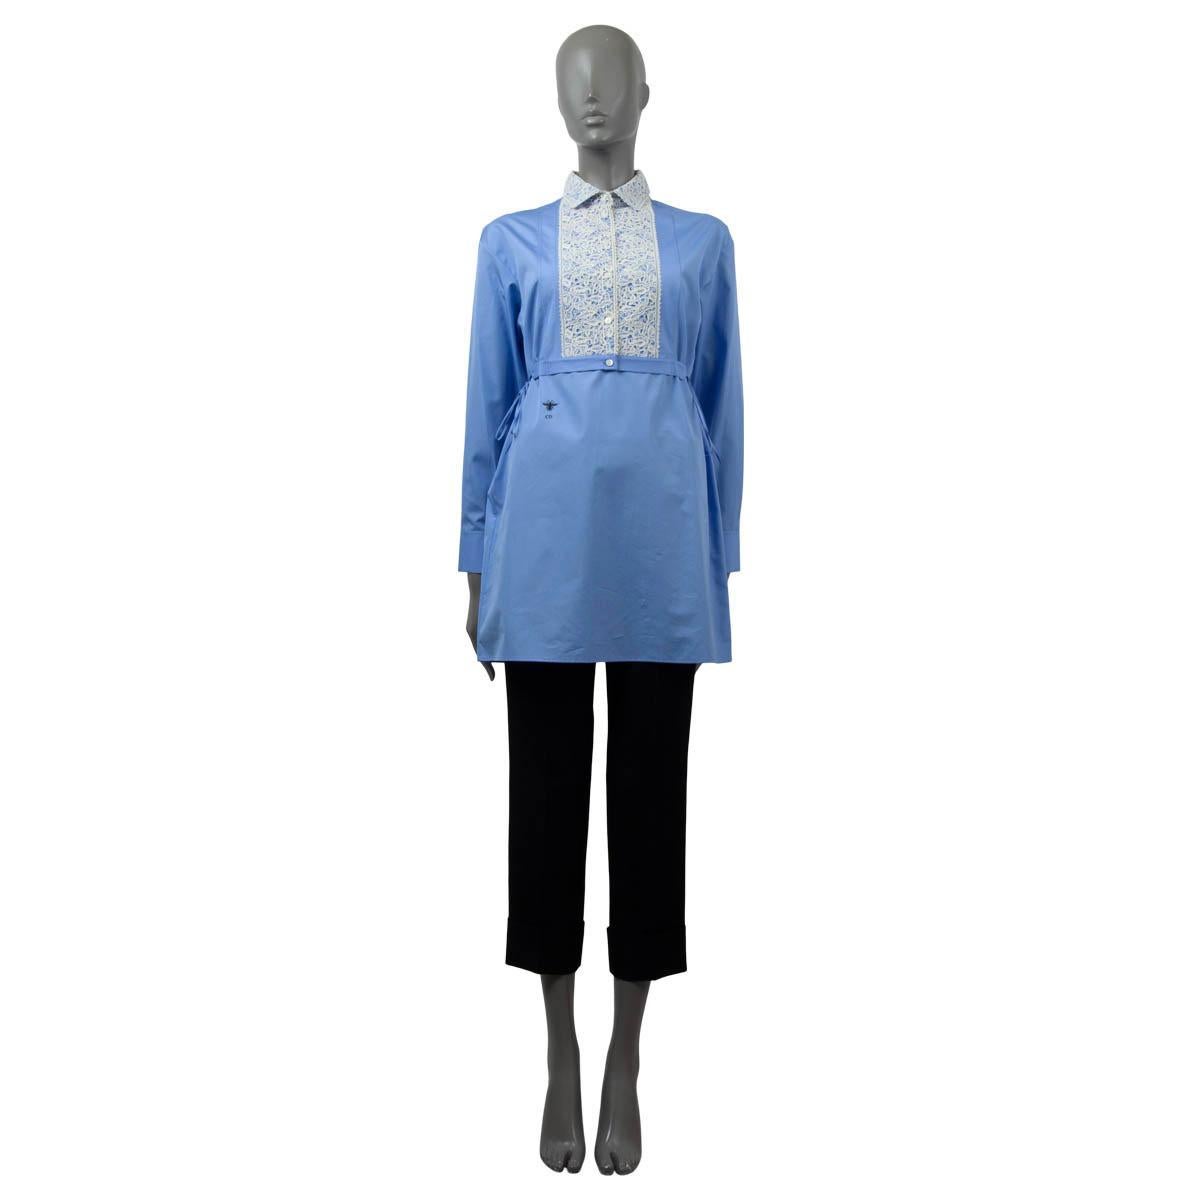 100% authentic Christian Dior belted tunic shirt in blue and ivory cotton (100%). Features lace plastron on the front.Opens with buttons on the front. Has been worn and is in excellent condition.

2021 Spring/Summer

Tag Size	34
Size	XXS
Shoulder